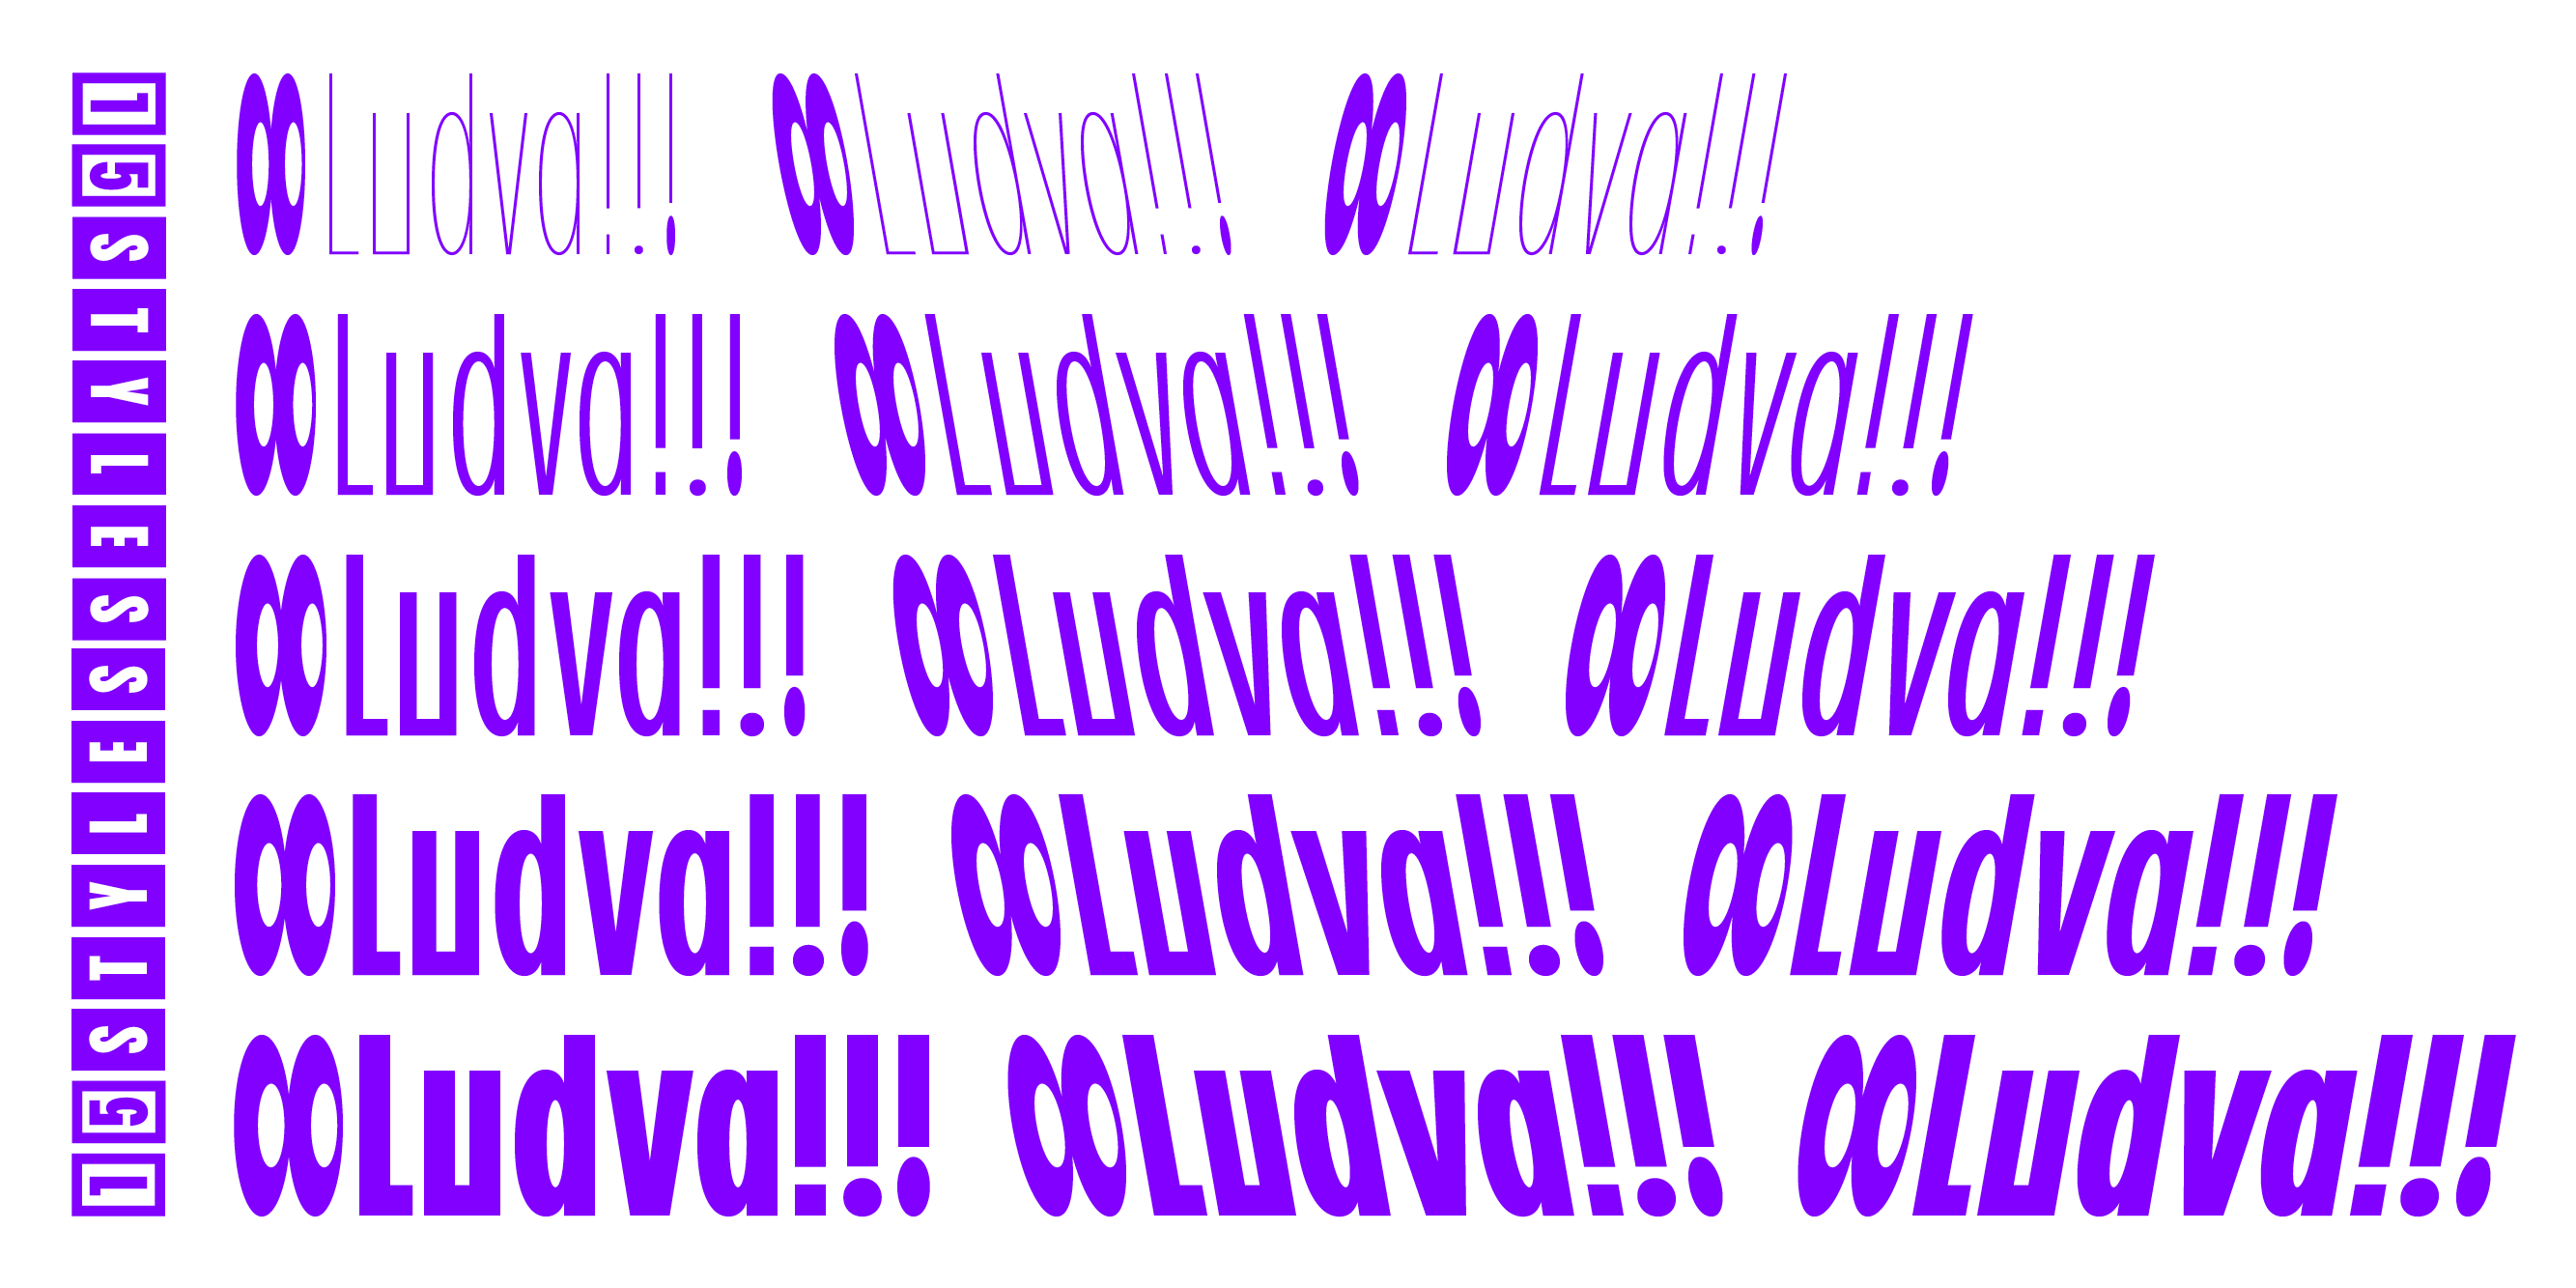 Card displaying BC Ludva typeface in various styles